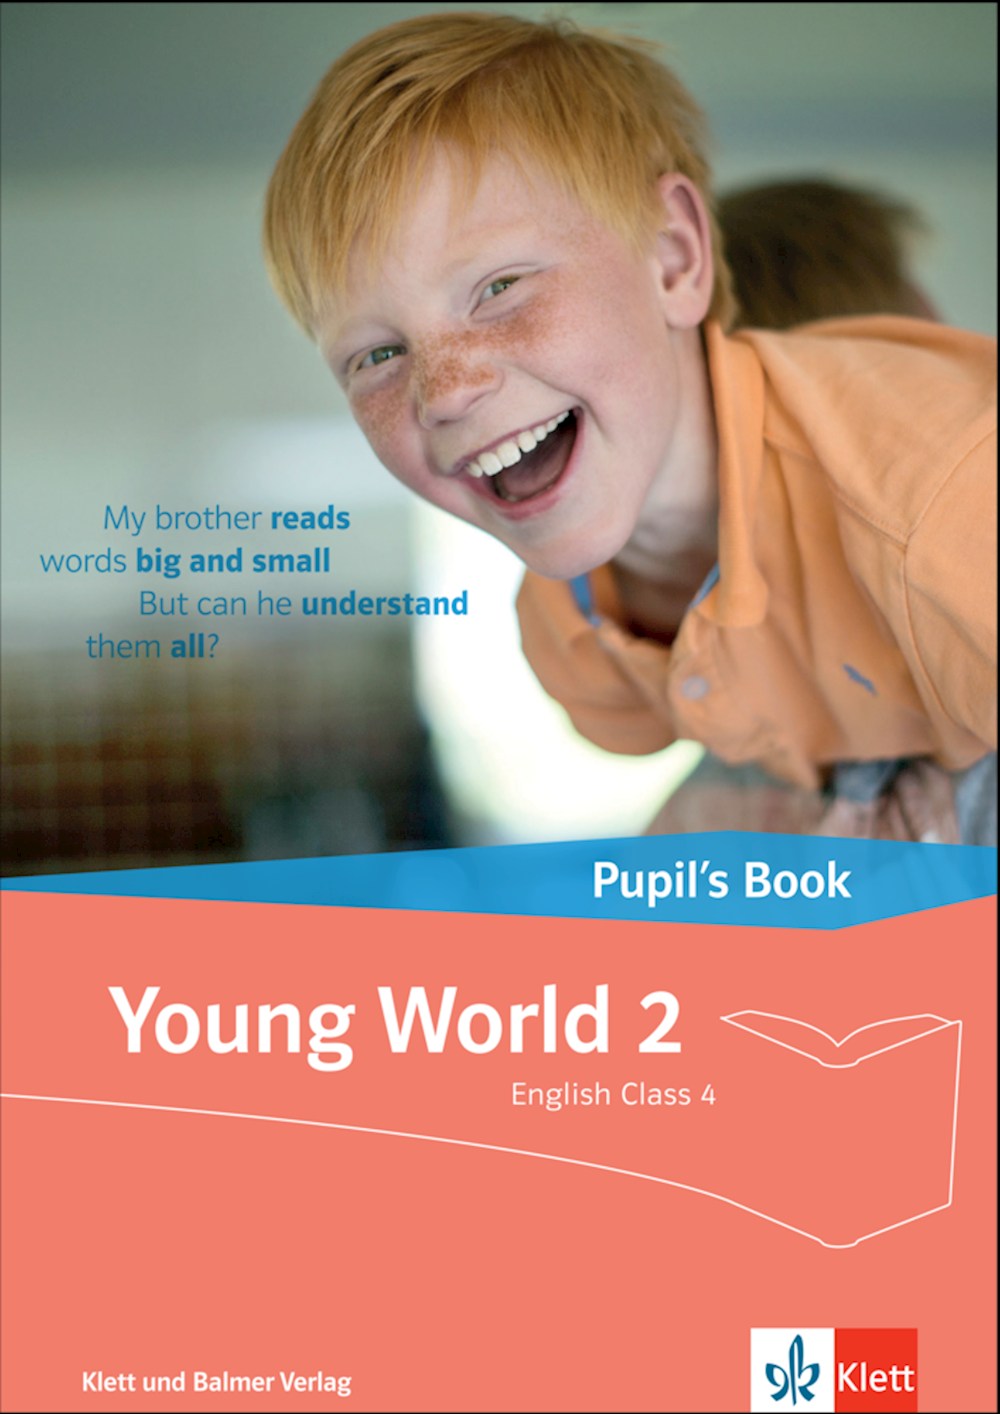 Young World 2, Pupil's Book 4. Sj.